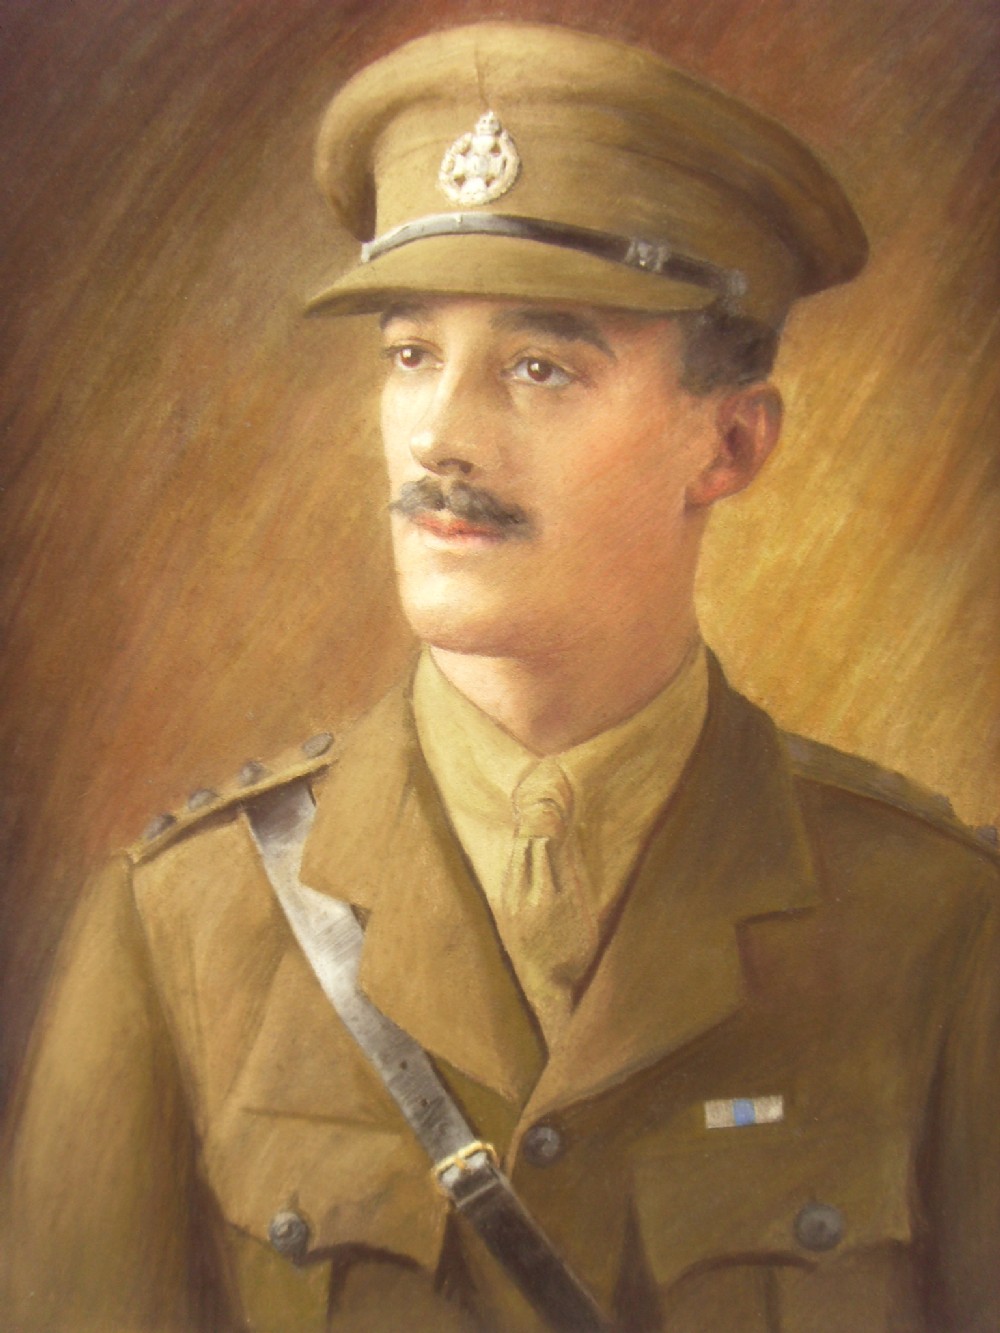 ww1 pastel gouache portrait on canvas of officer in the rifles brigade